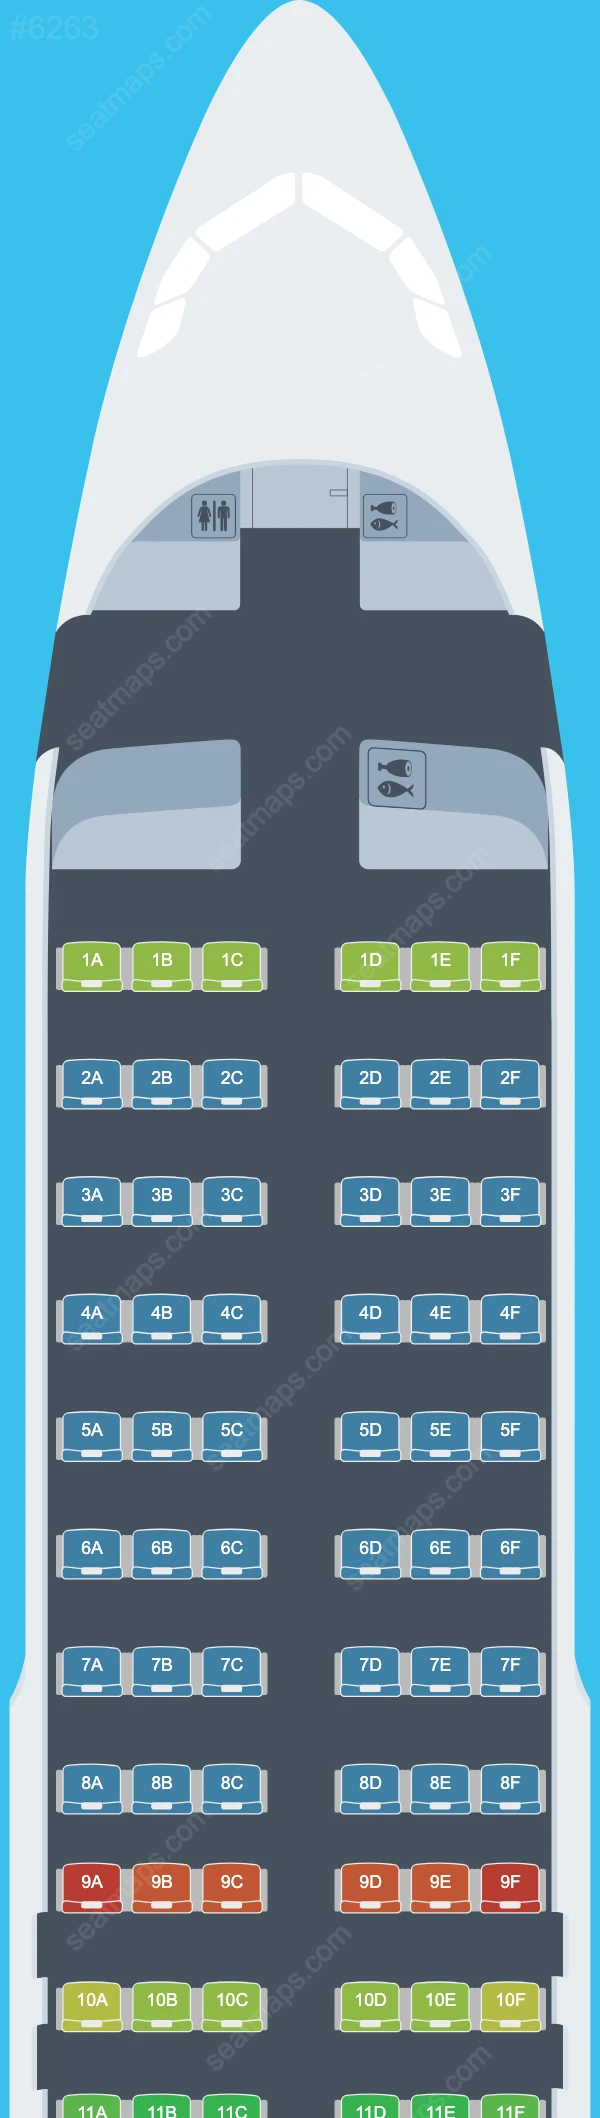 Turkish Airlines Airbus A320 Seat Maps A320-200 V.1